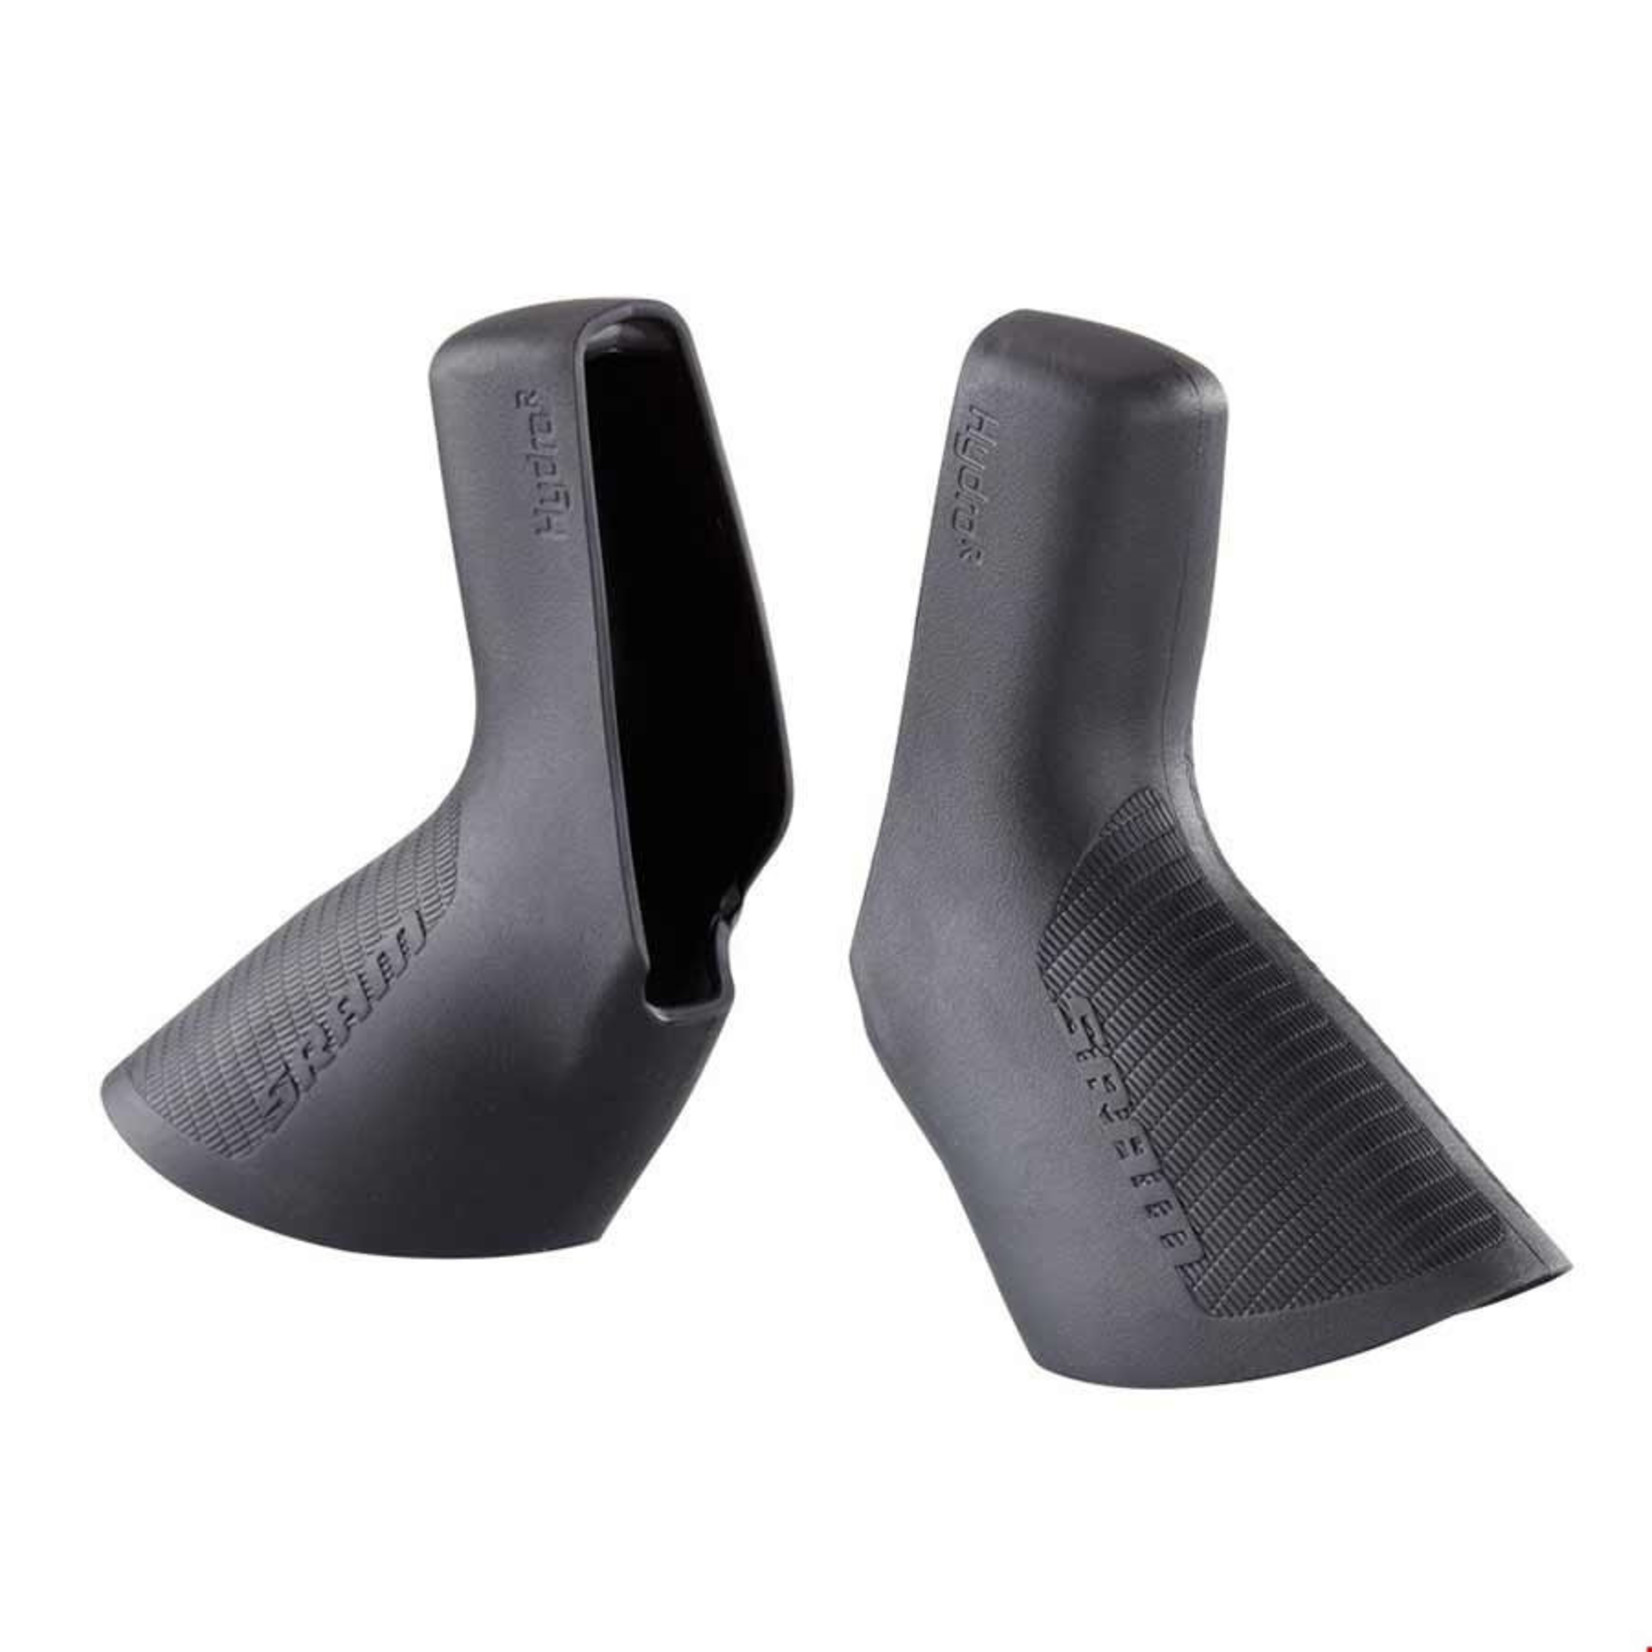 SRAM SRAM Red, Force, Rival, S700 Hydraulic Brake Lever Hood Covers, Black, Pair